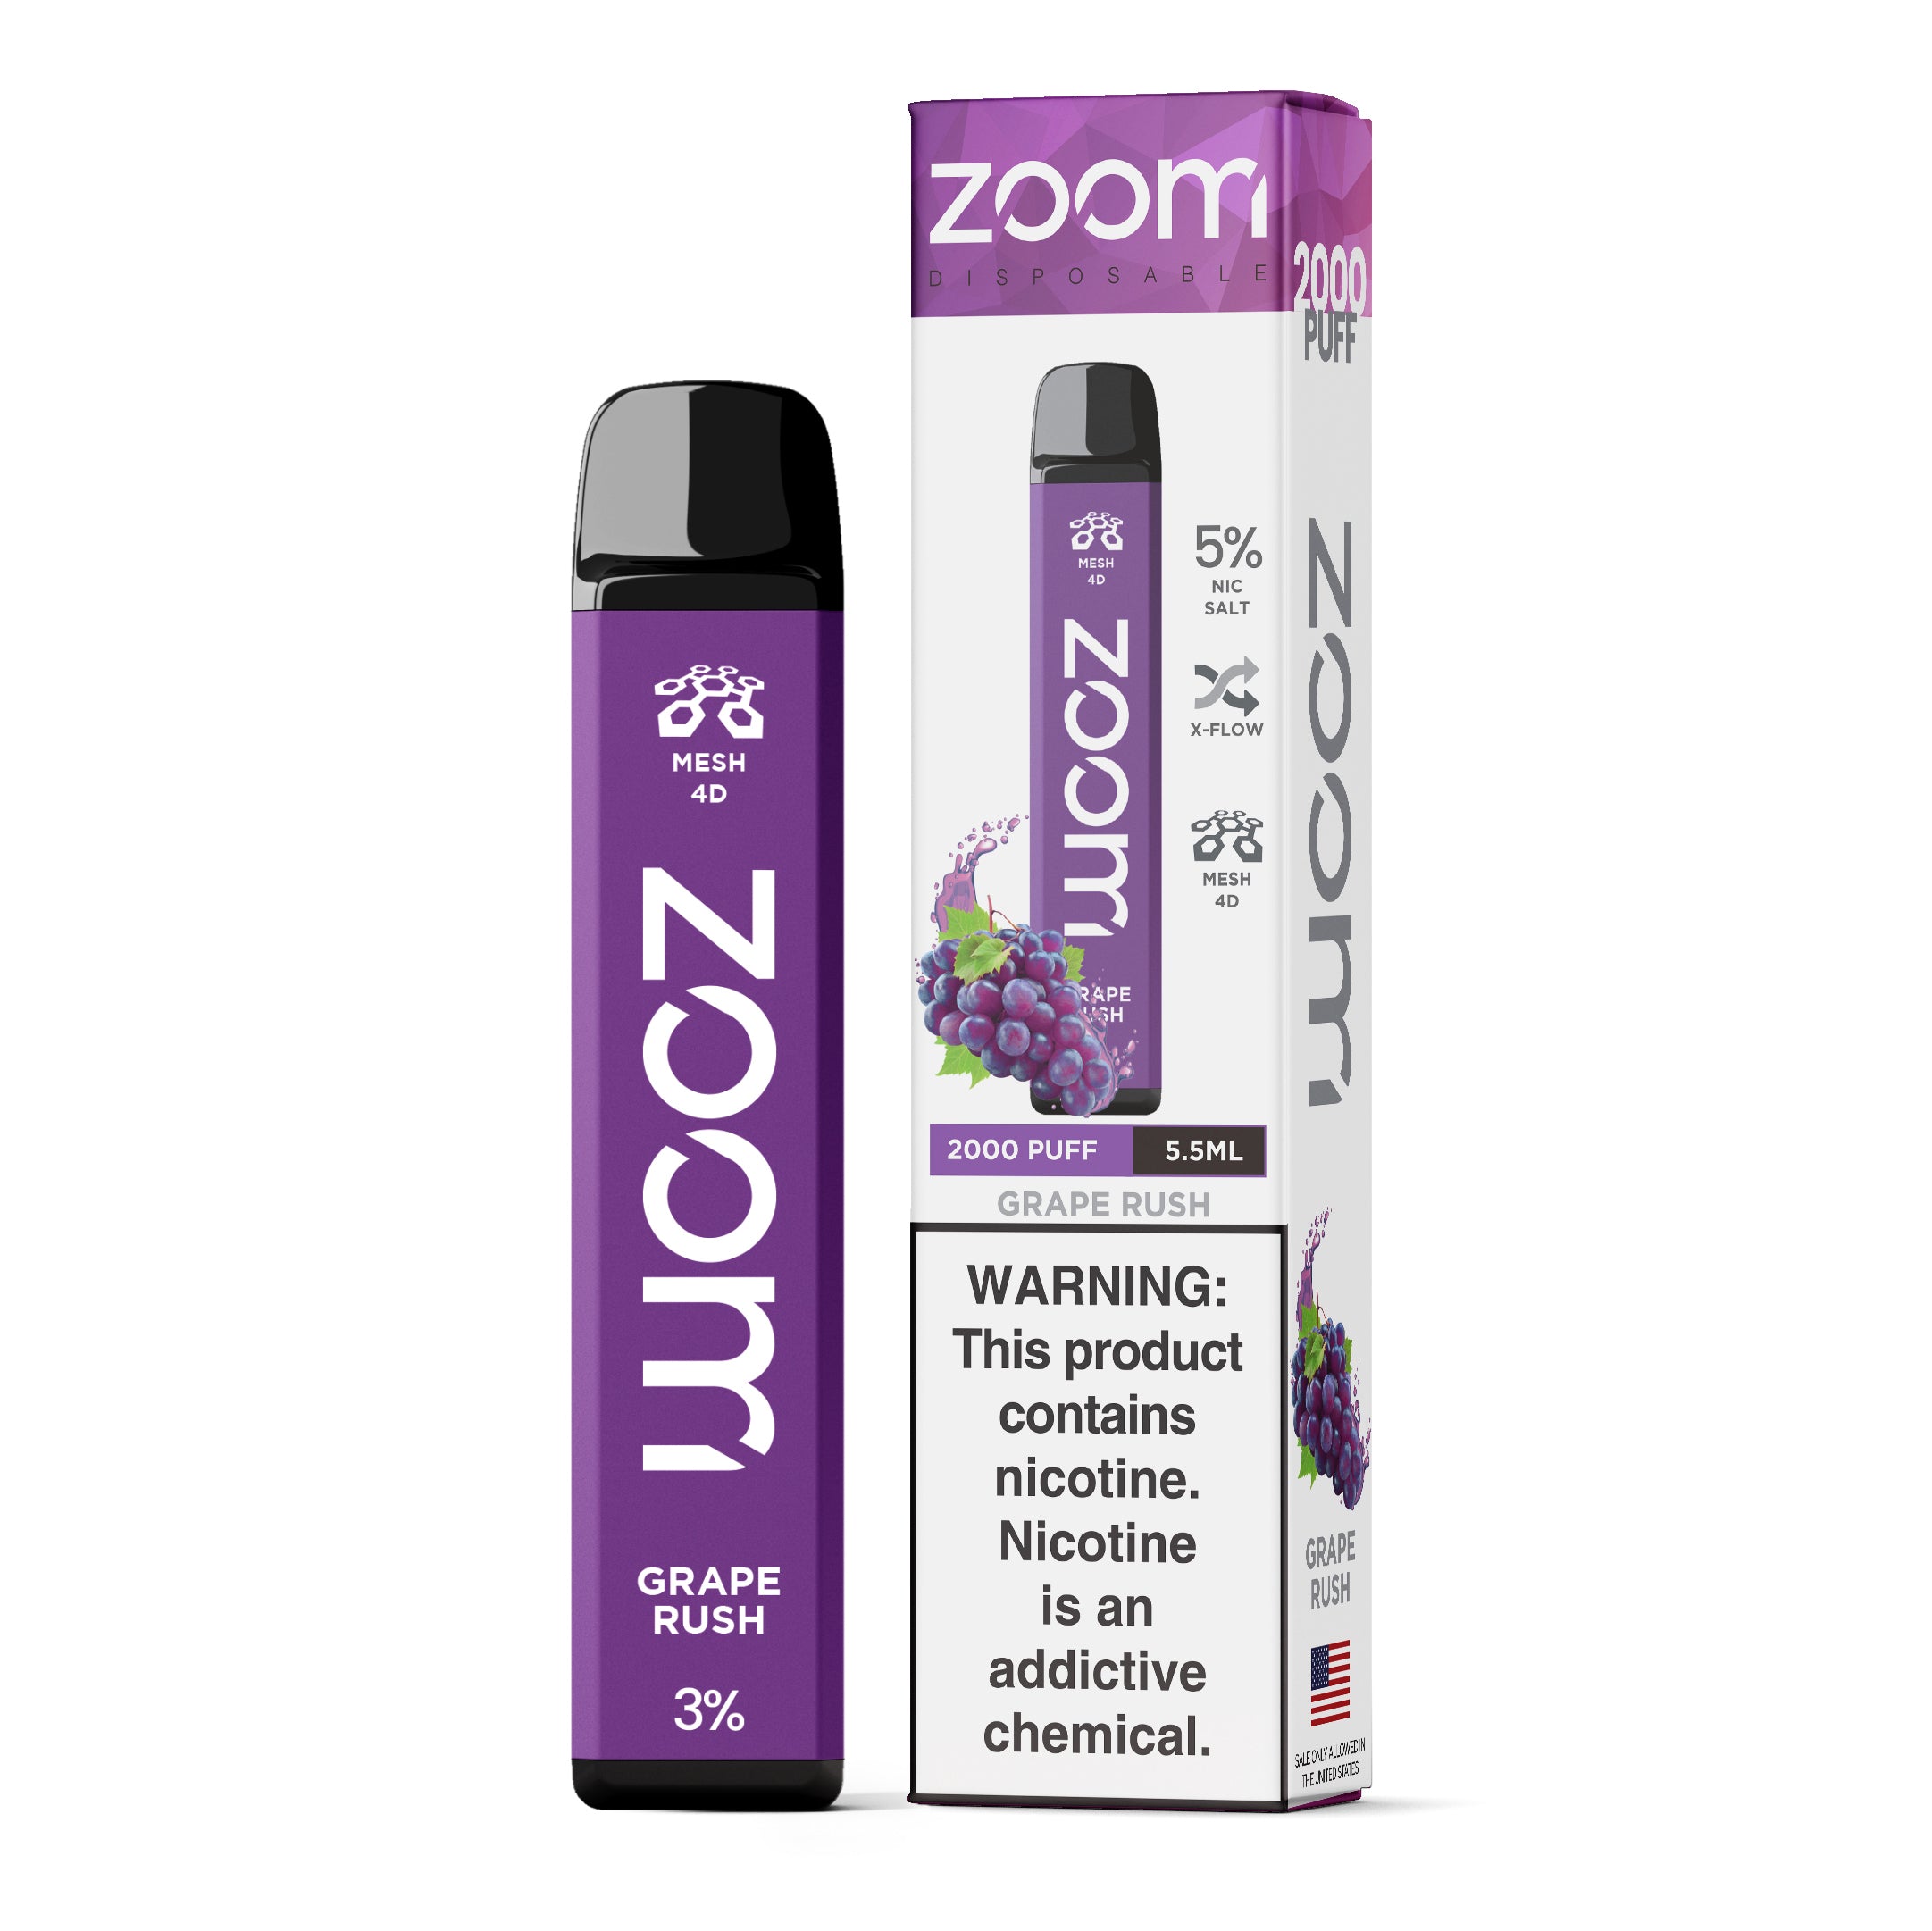 Zoom Disposable | 2000 Puffs | 5.5mL Grape Rush with packaging